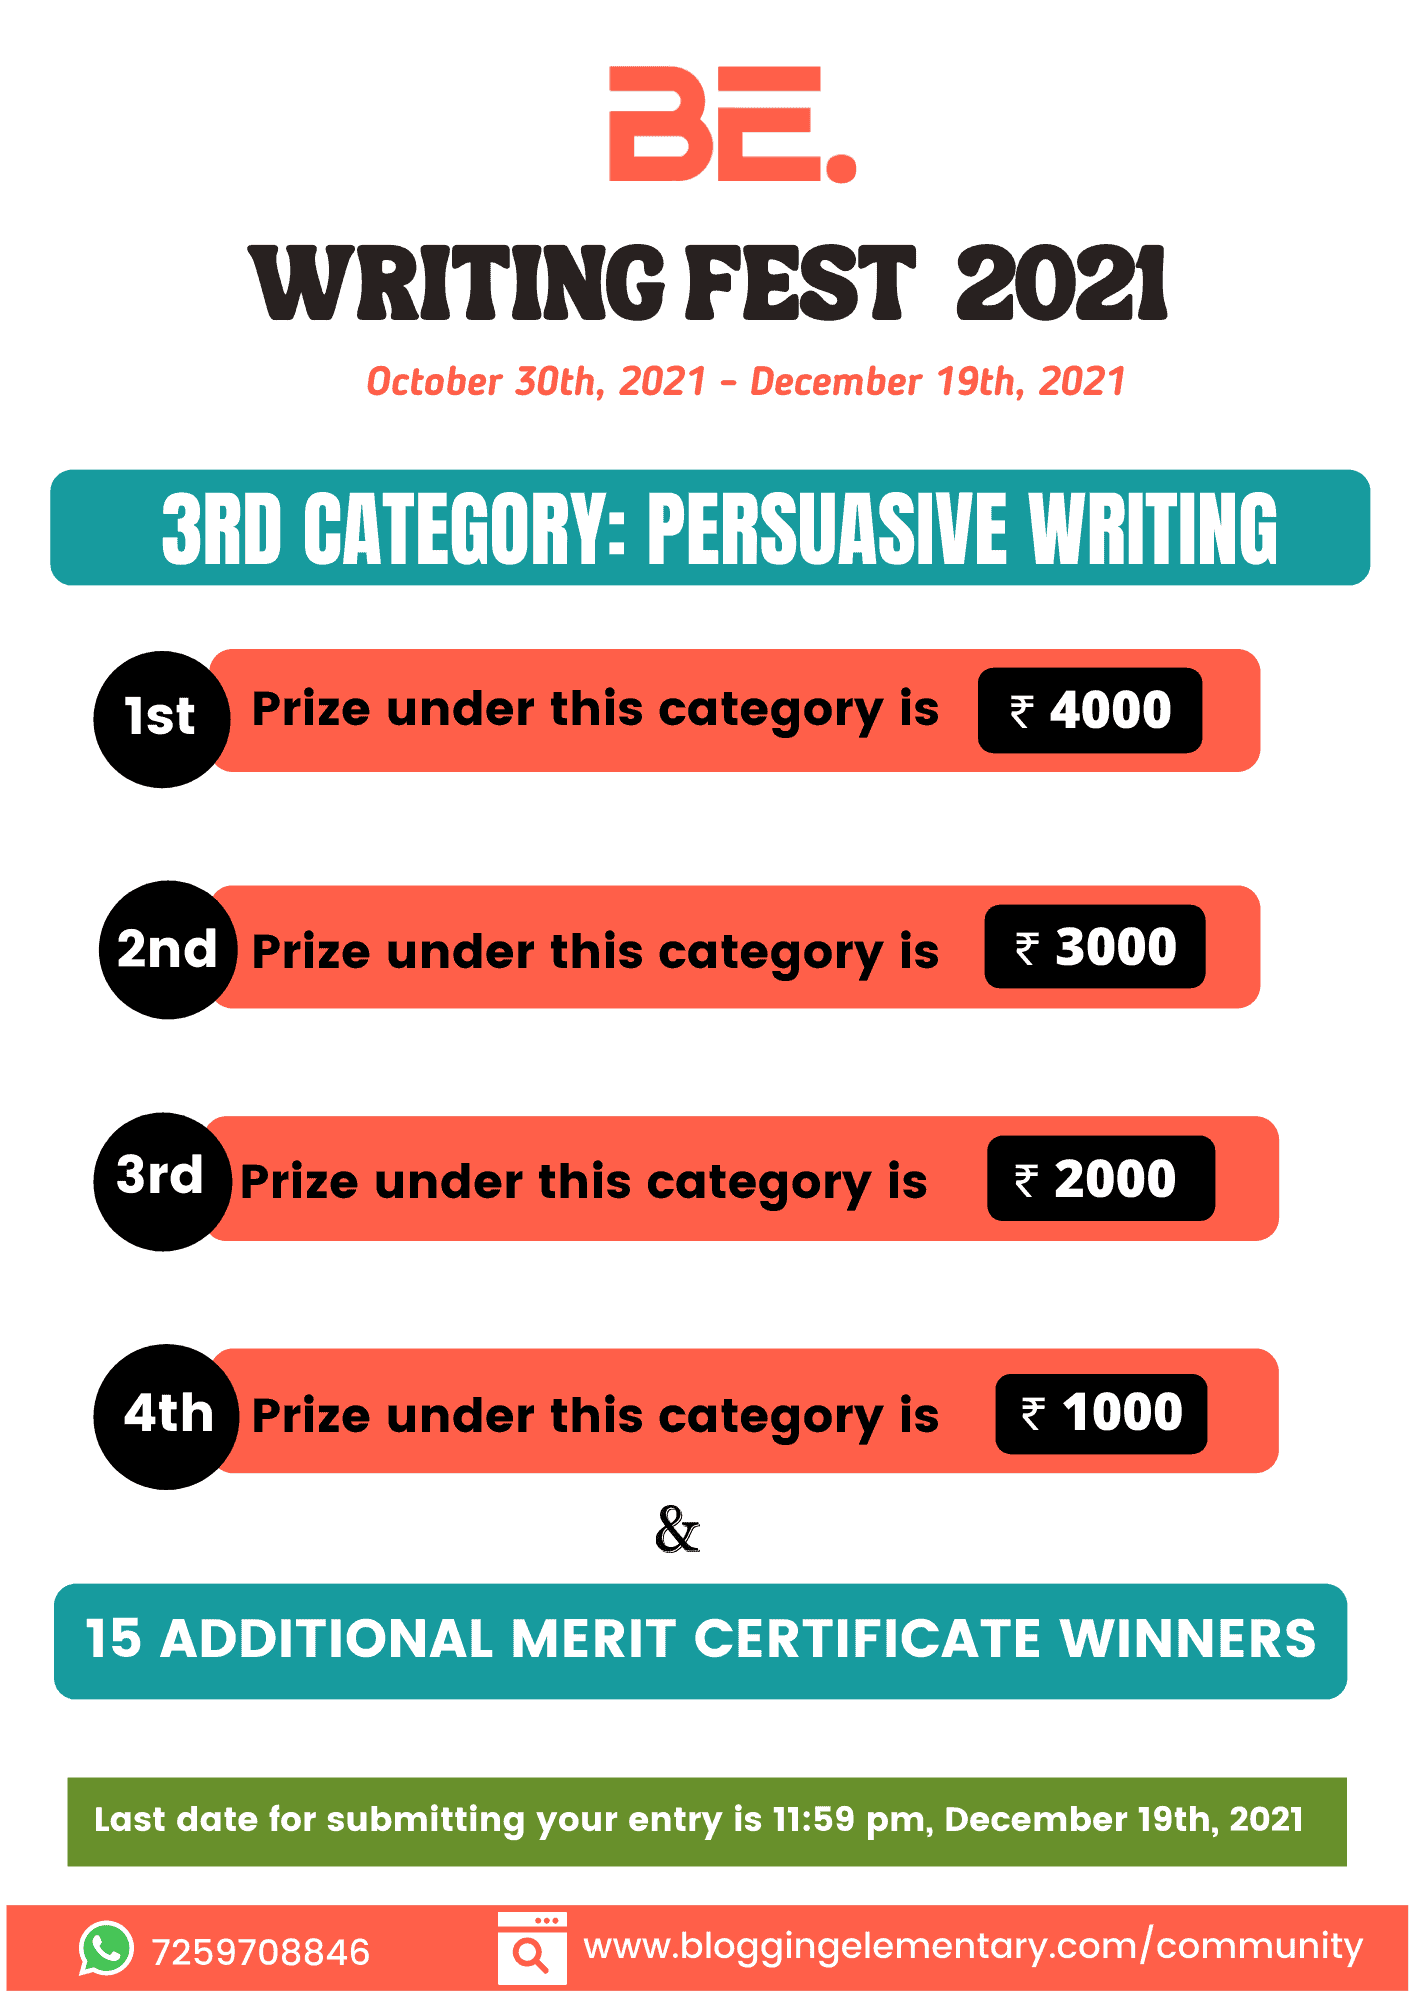 BE. Writing Fest Category Persuasive Writing